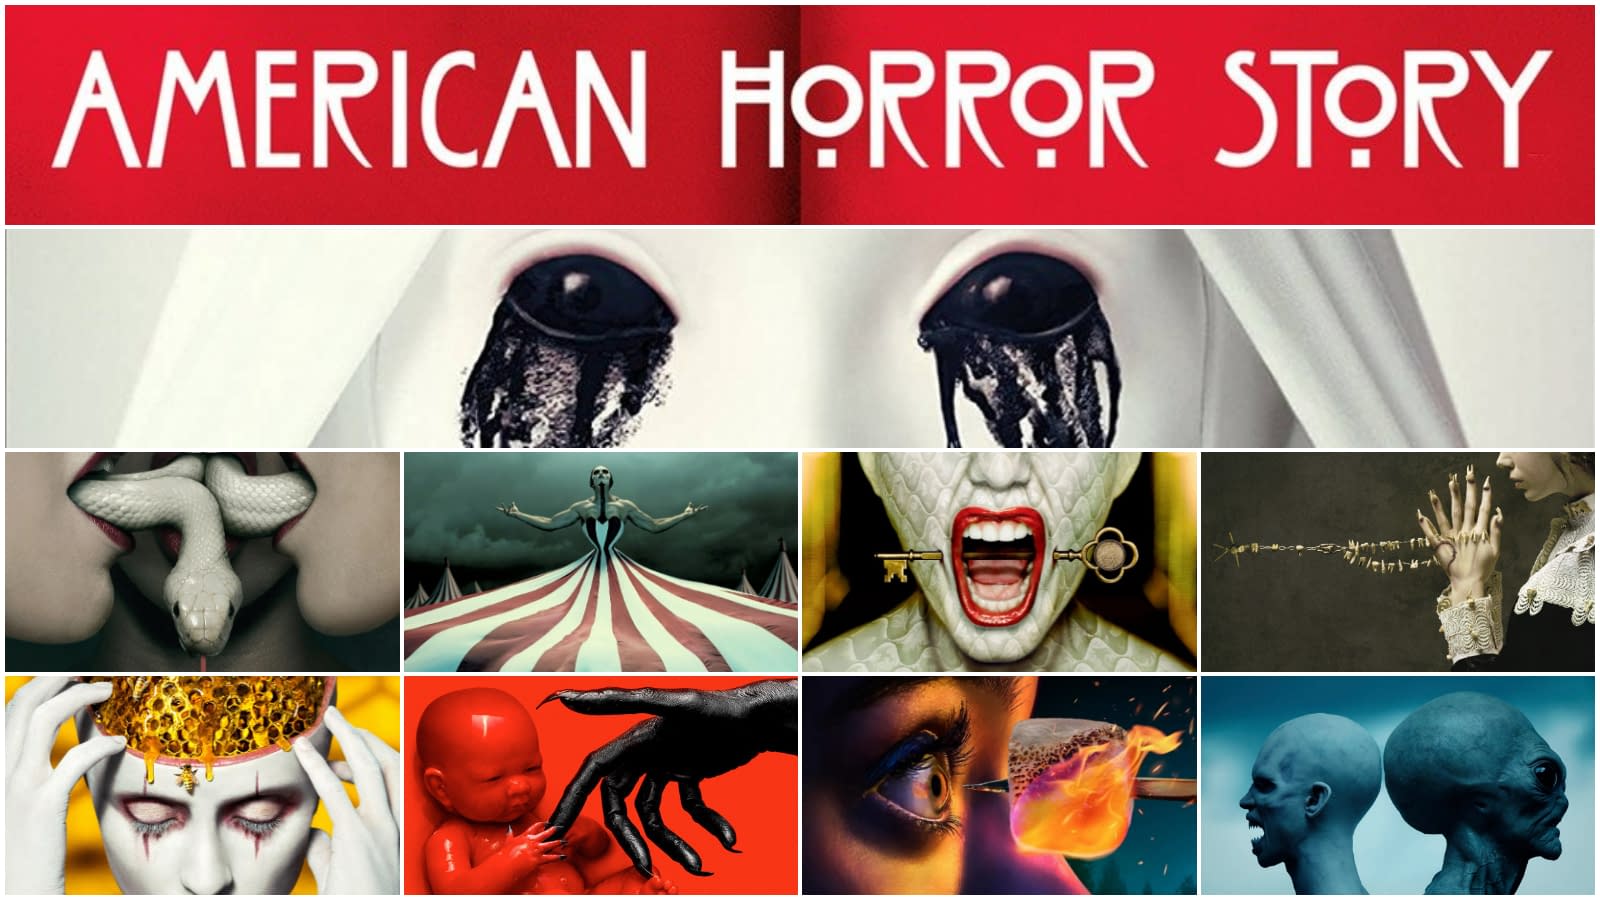 American Horror Story We Rank 10 AHS Seasons So You Don't Have To